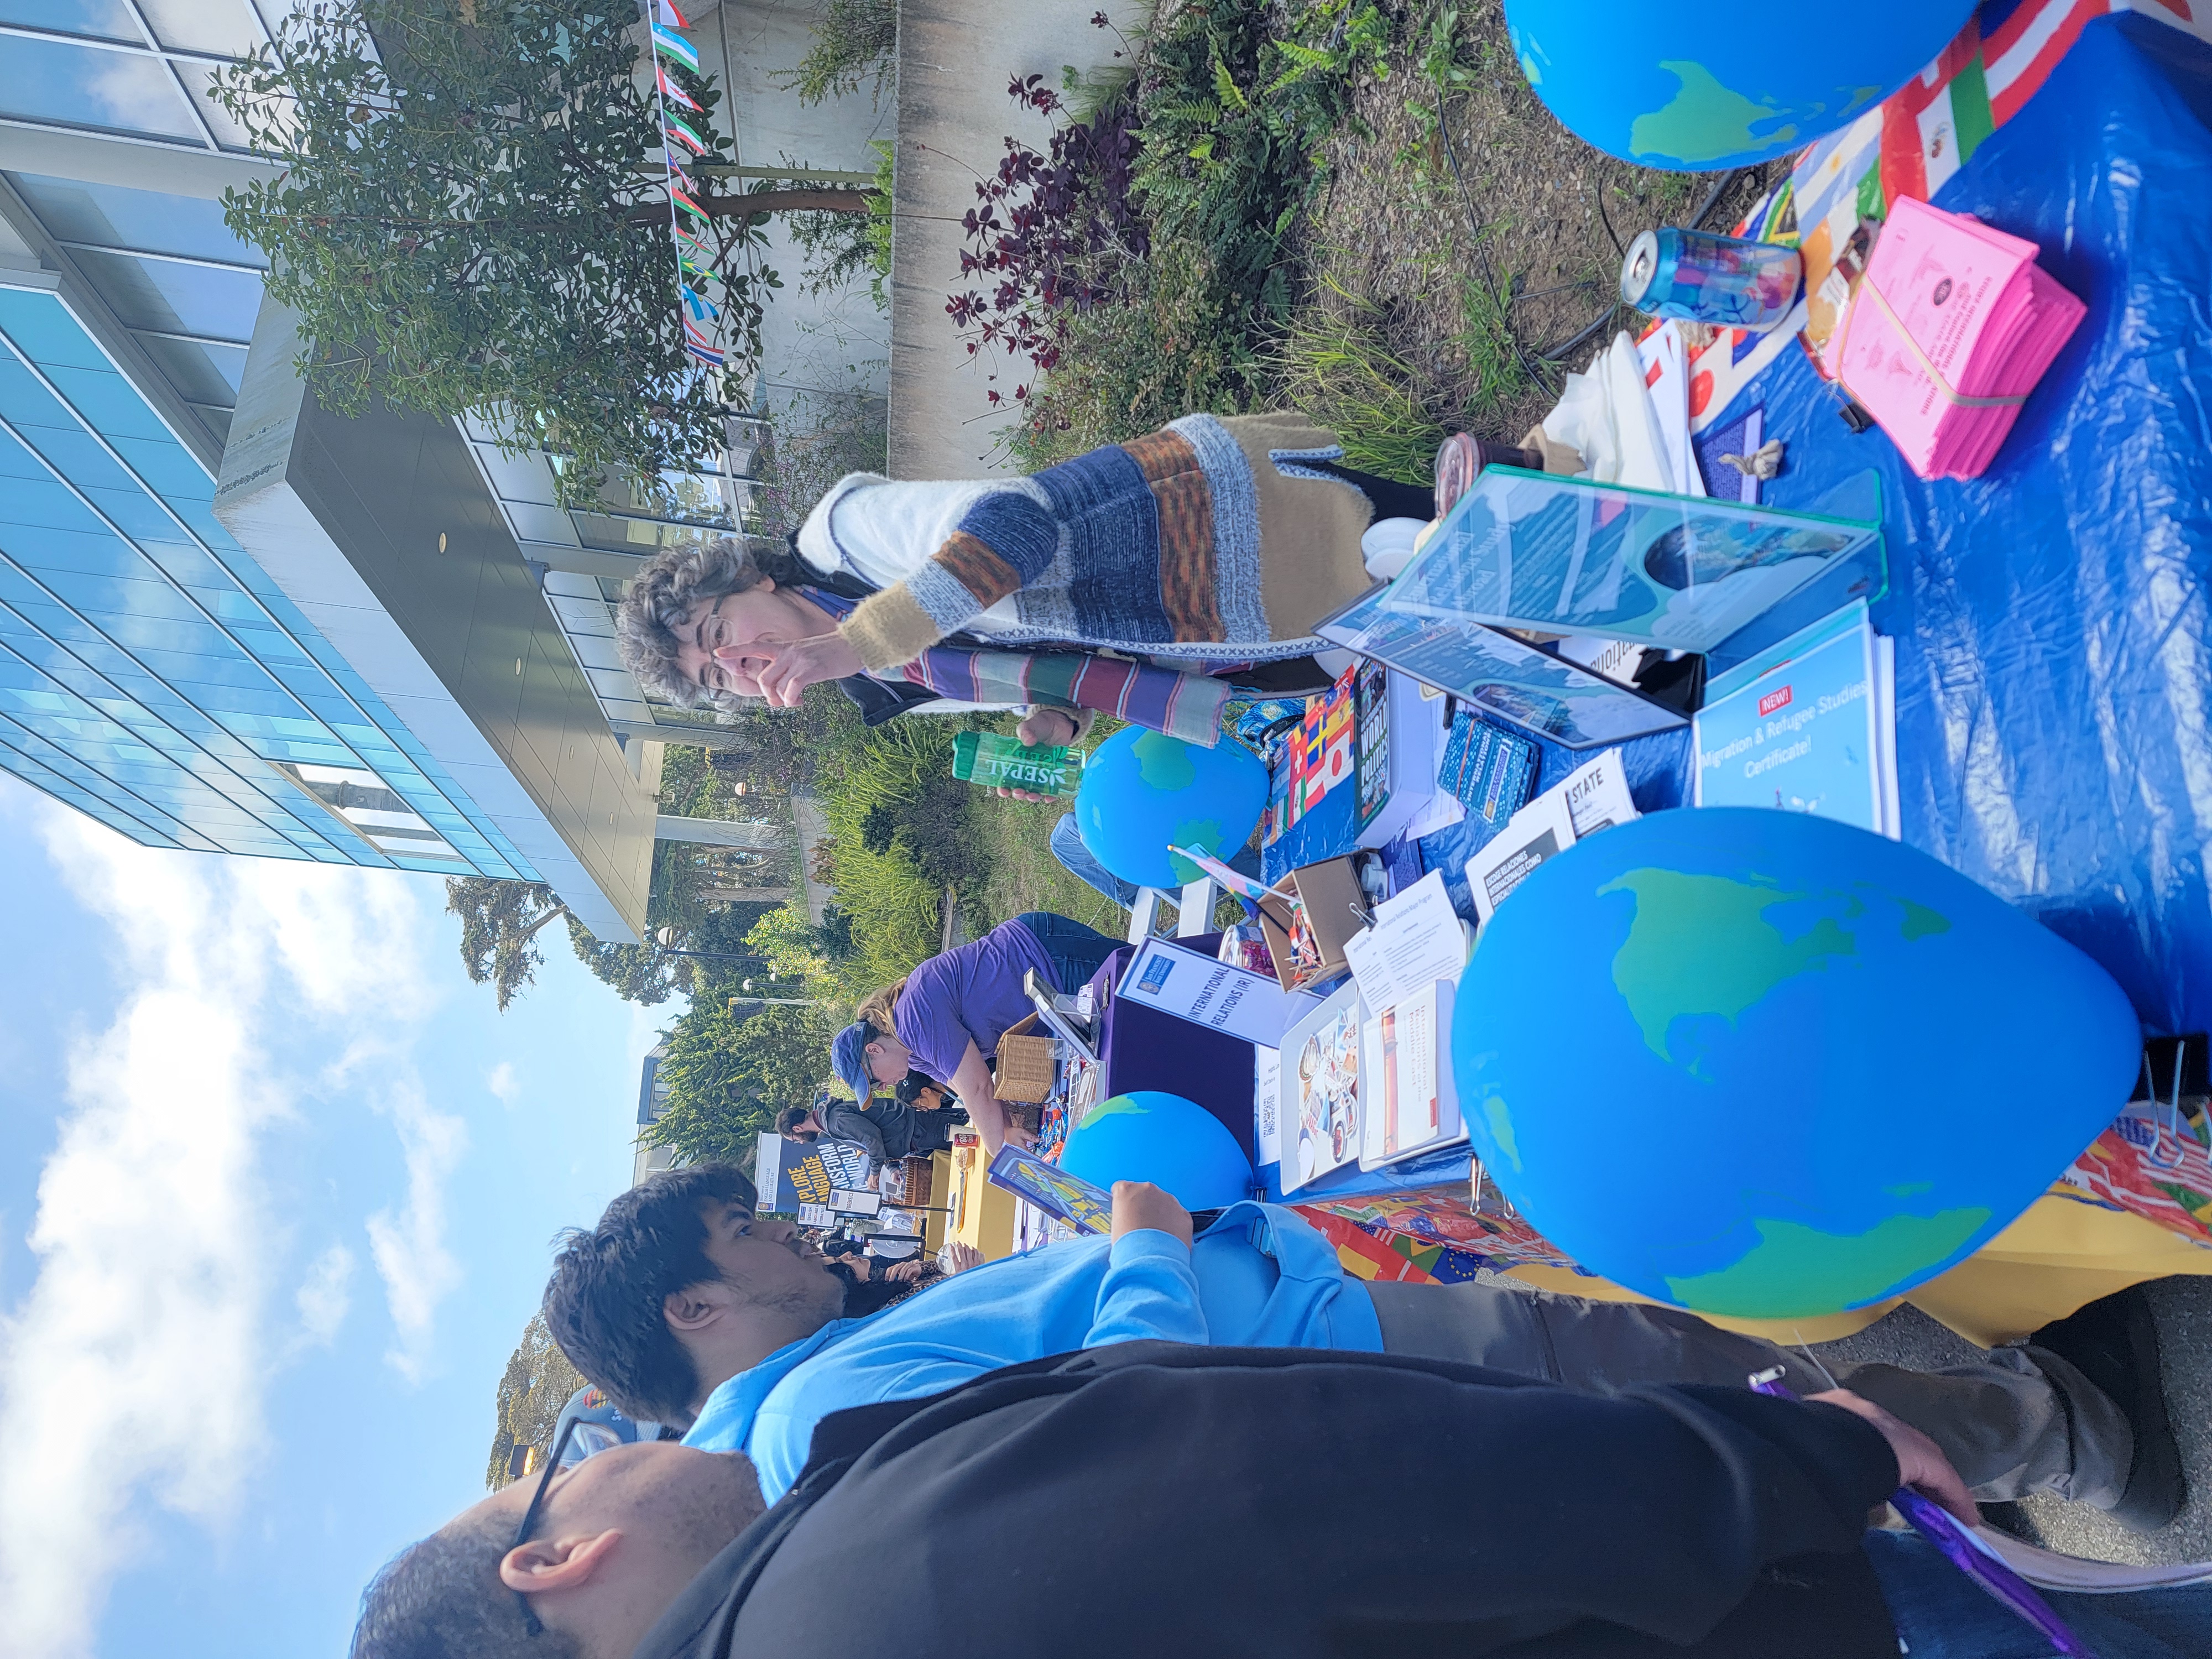 Professor Volk stands behind the International Relations Department table, gesturing enthusiastically while speaking to a visiting student and parent. The table features globe-shaped balloons and flyers.